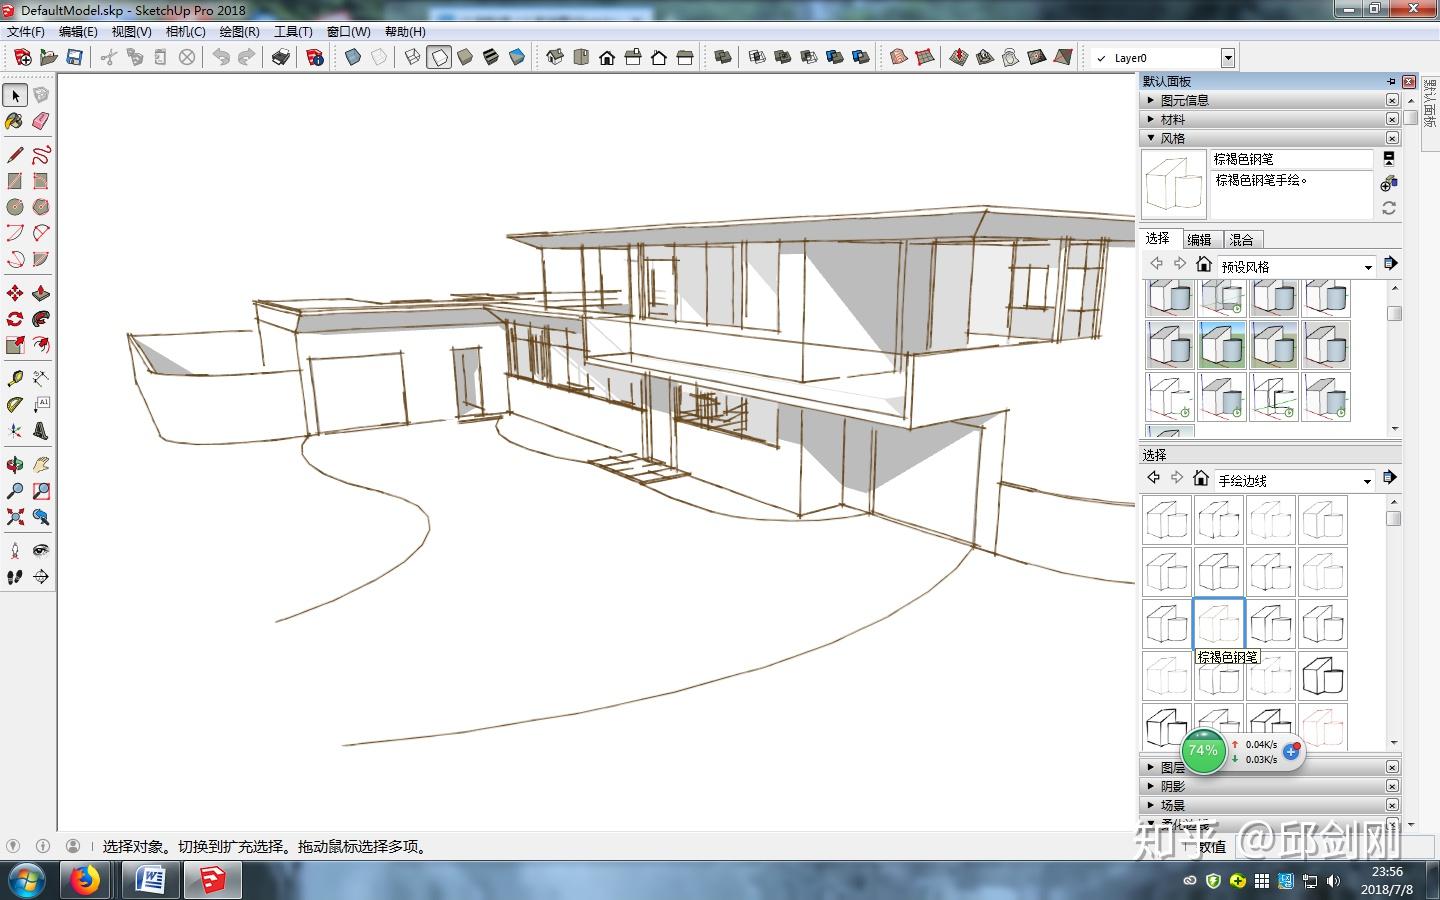 How to Showcase Interior Design Projects with SketchUp